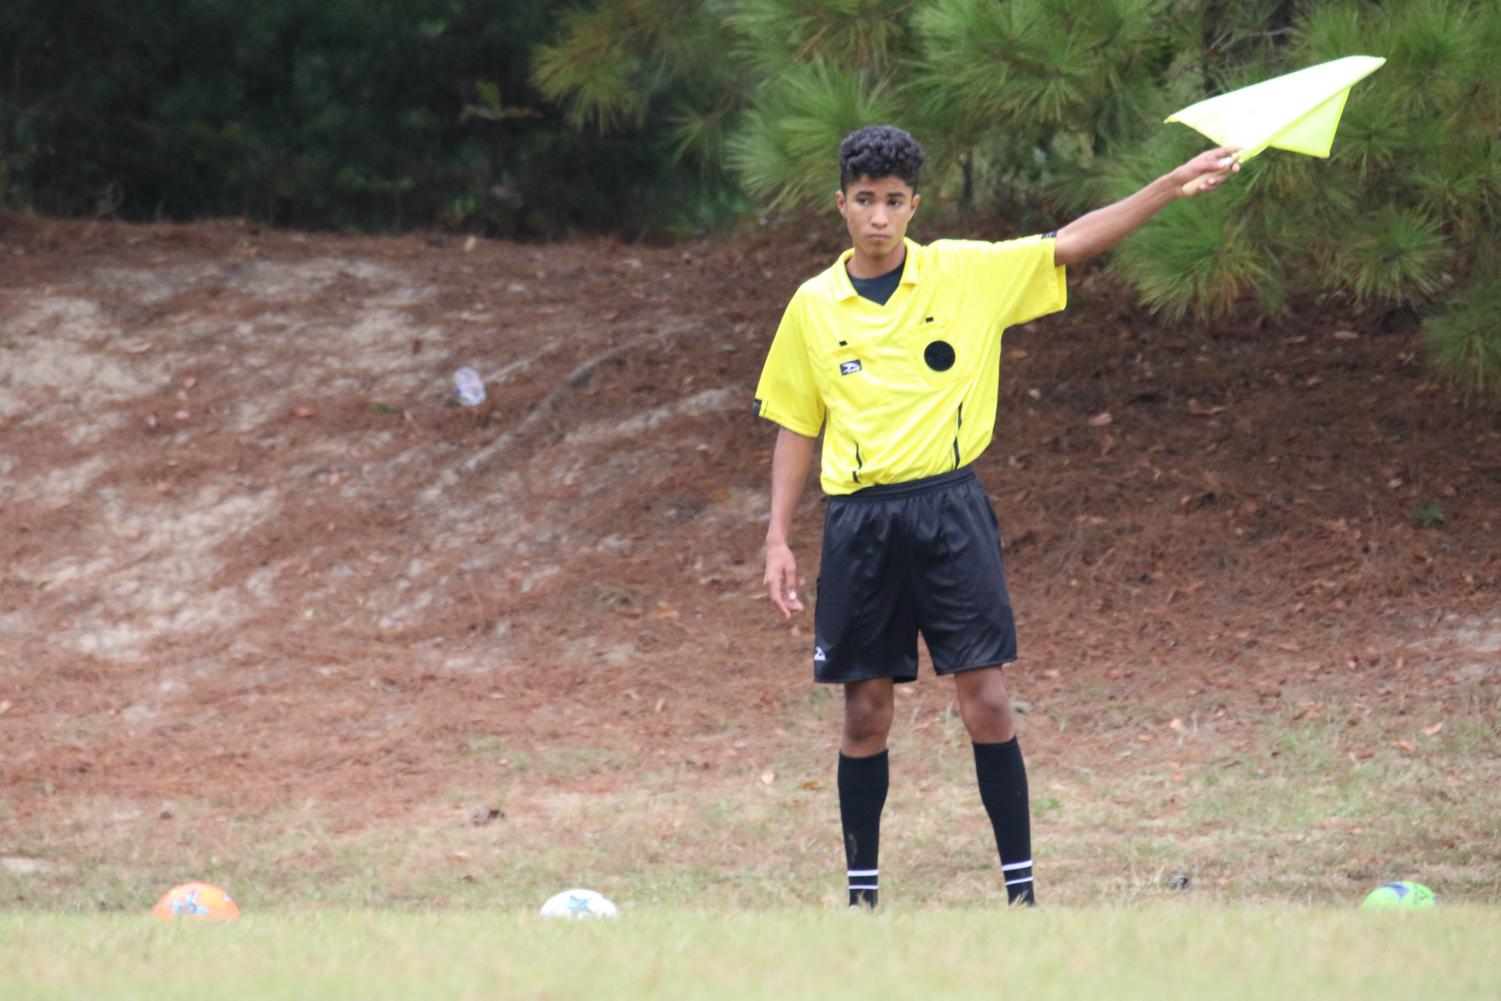 Sophomore soccer referee Salomao Saboia raises his flag to make a call. He is from Brazil, the soccer country of the world, and he has played soccer for most of his life. This is his first season refereeing.